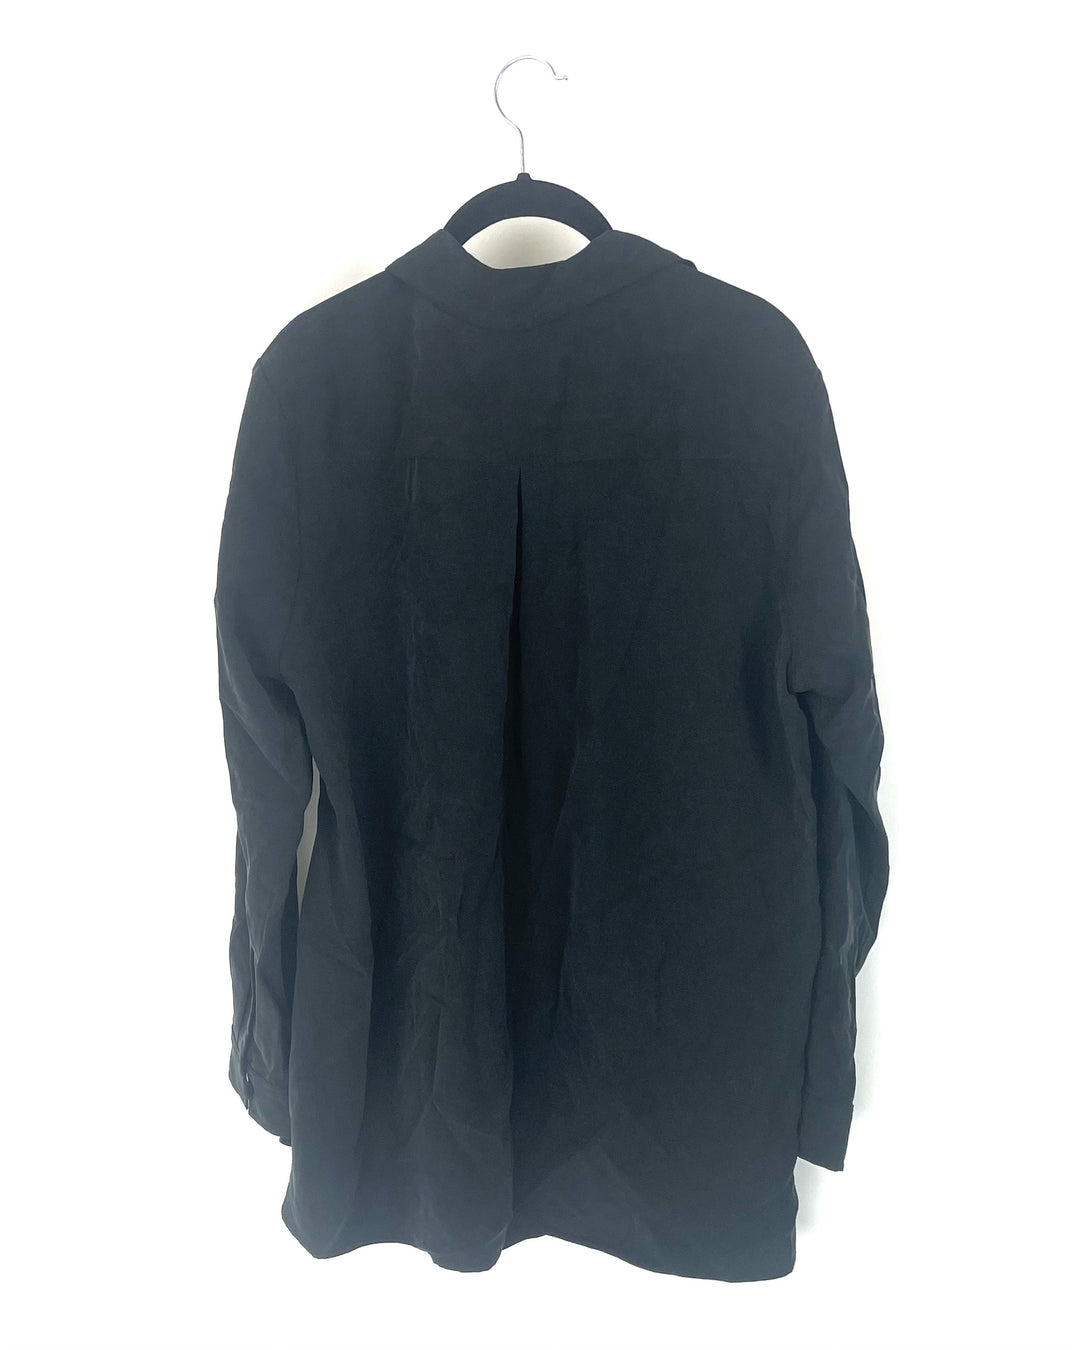 Black Long Sleeve Blouse - Size 16 and 18